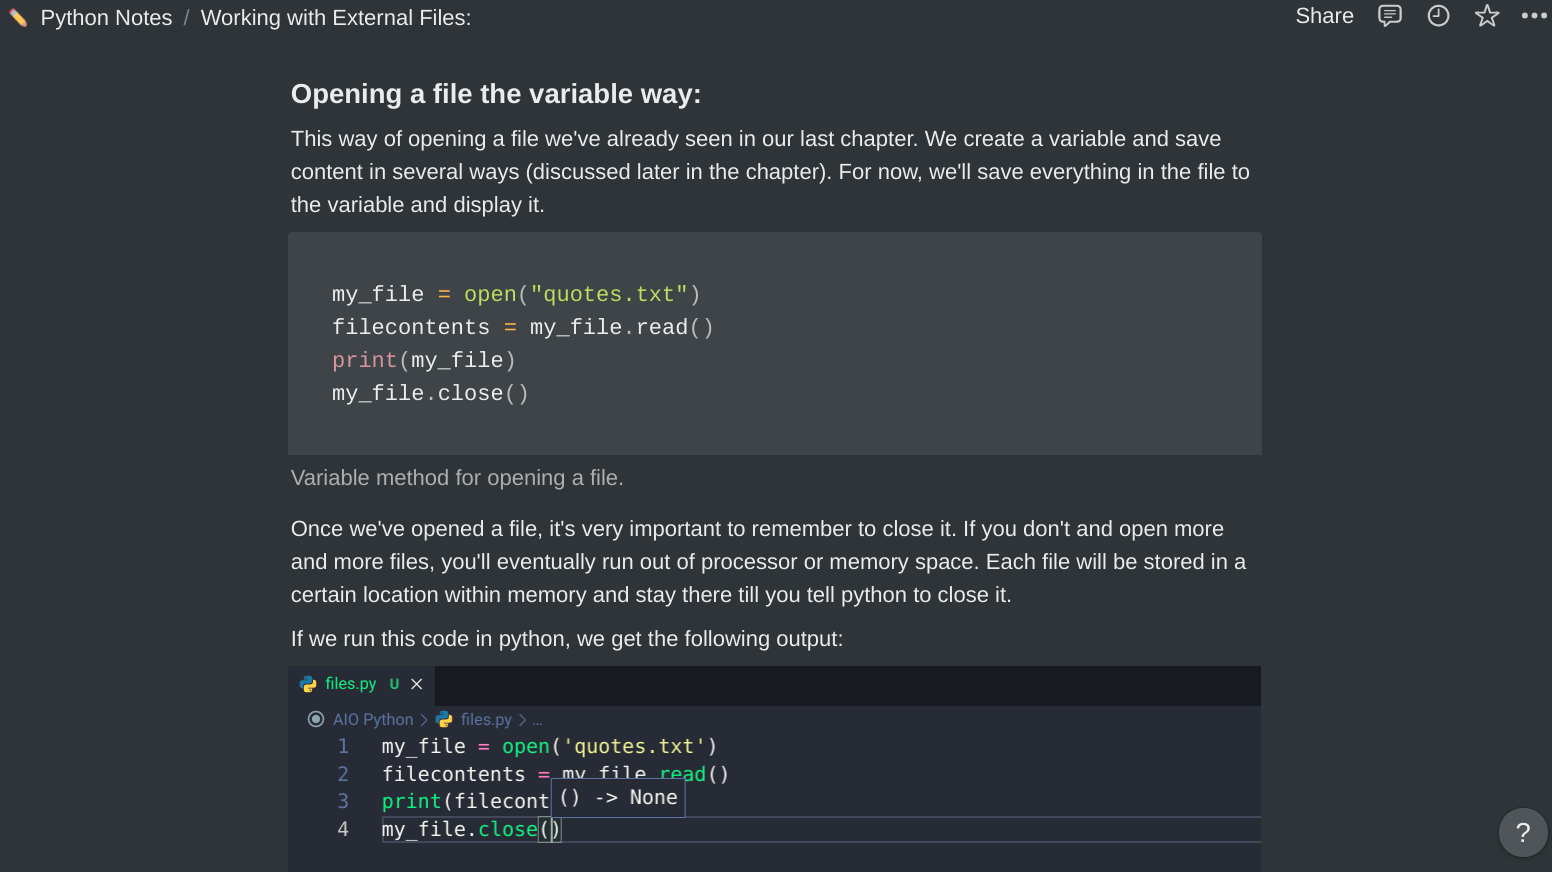 Screenshot of one of my Python notes showing code, markdown and images